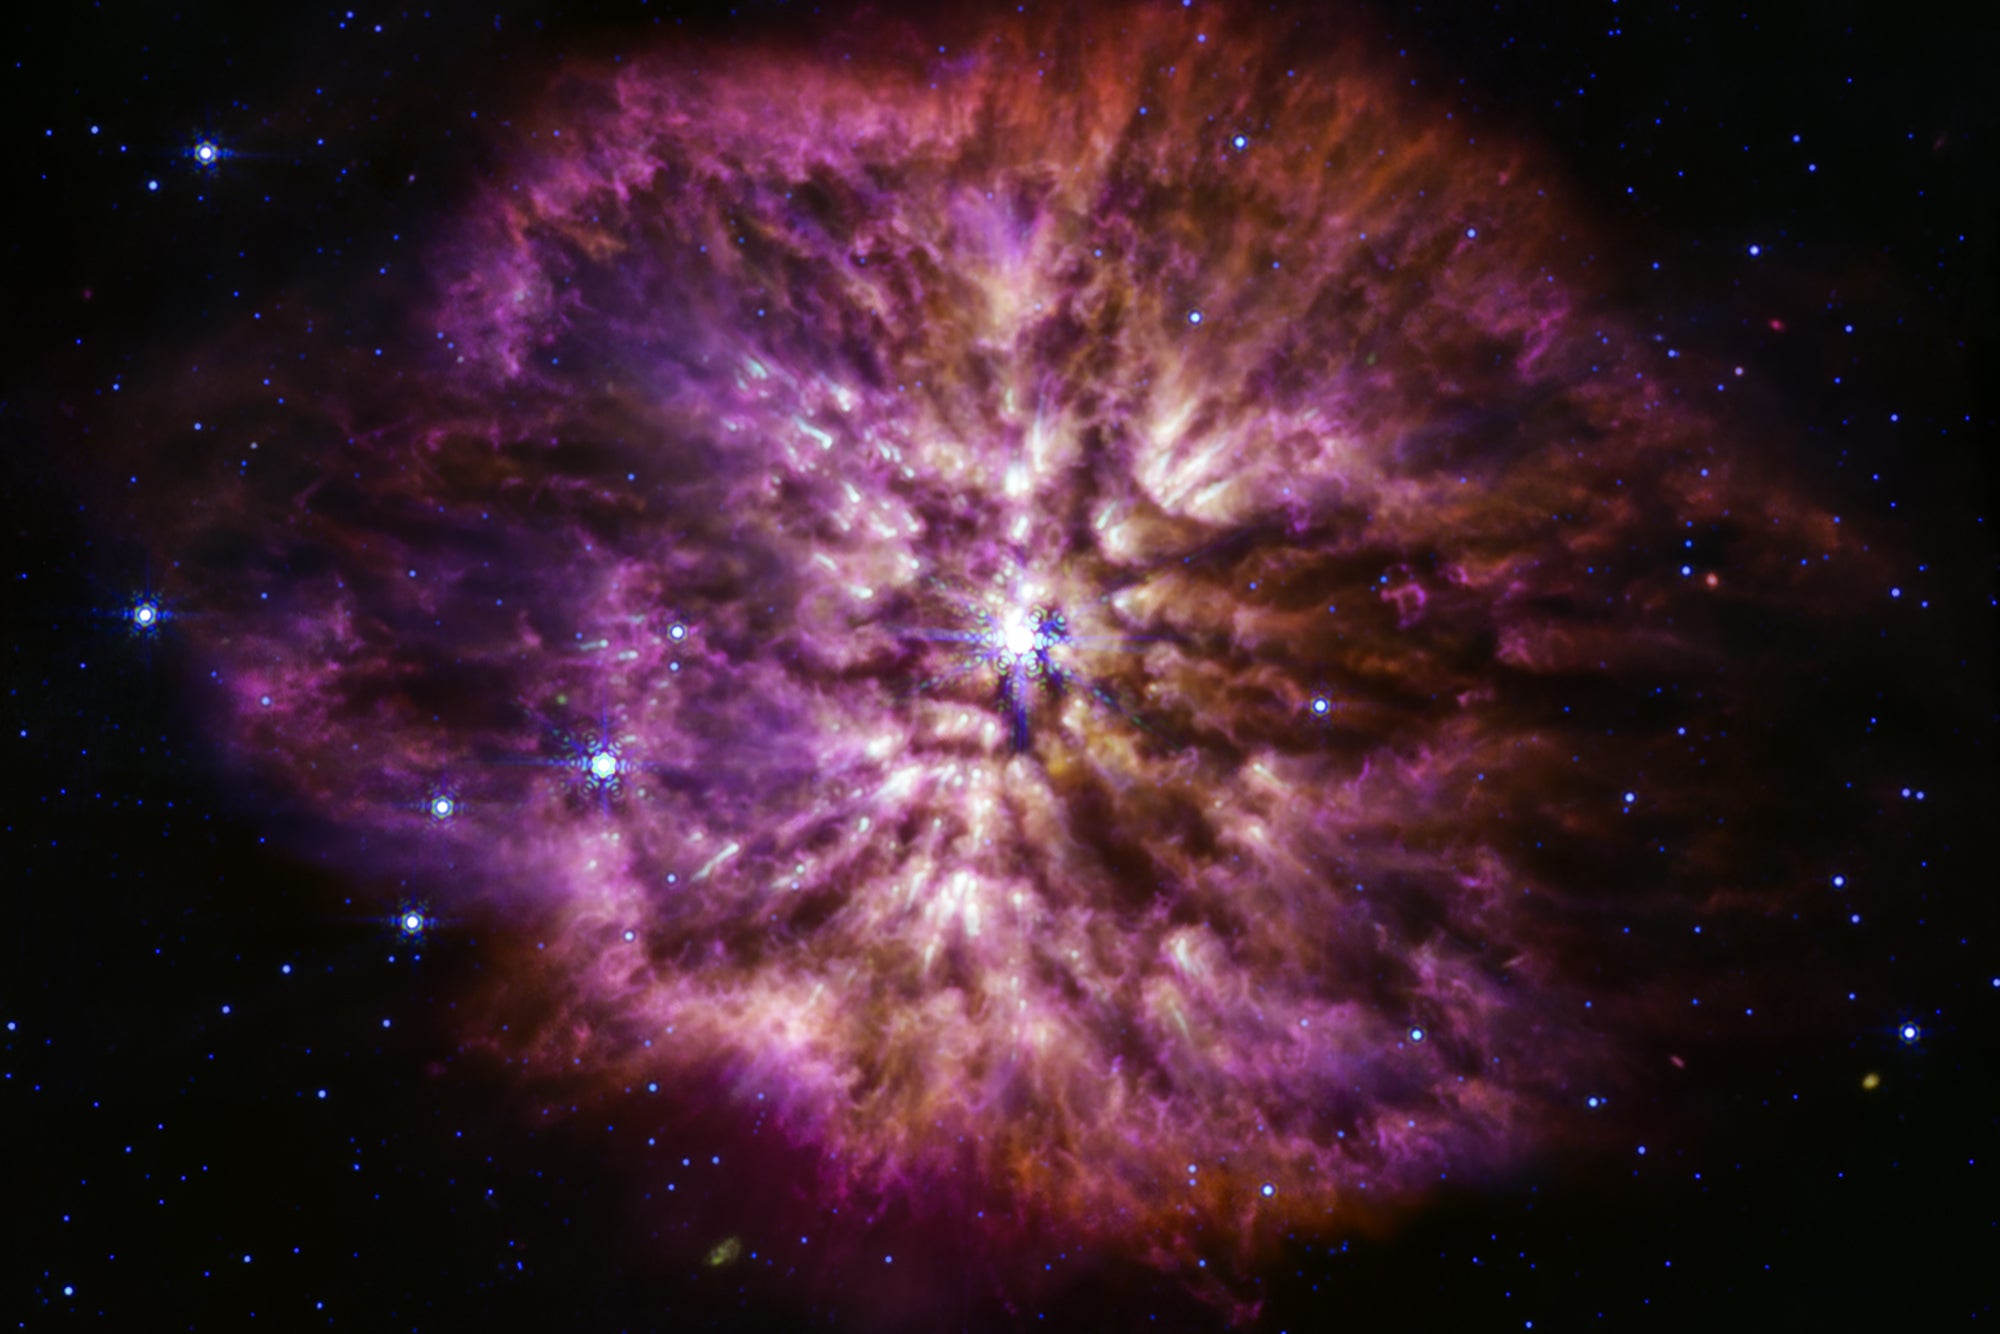 The James Webb Telescope just sent back these amazing images of a dying star